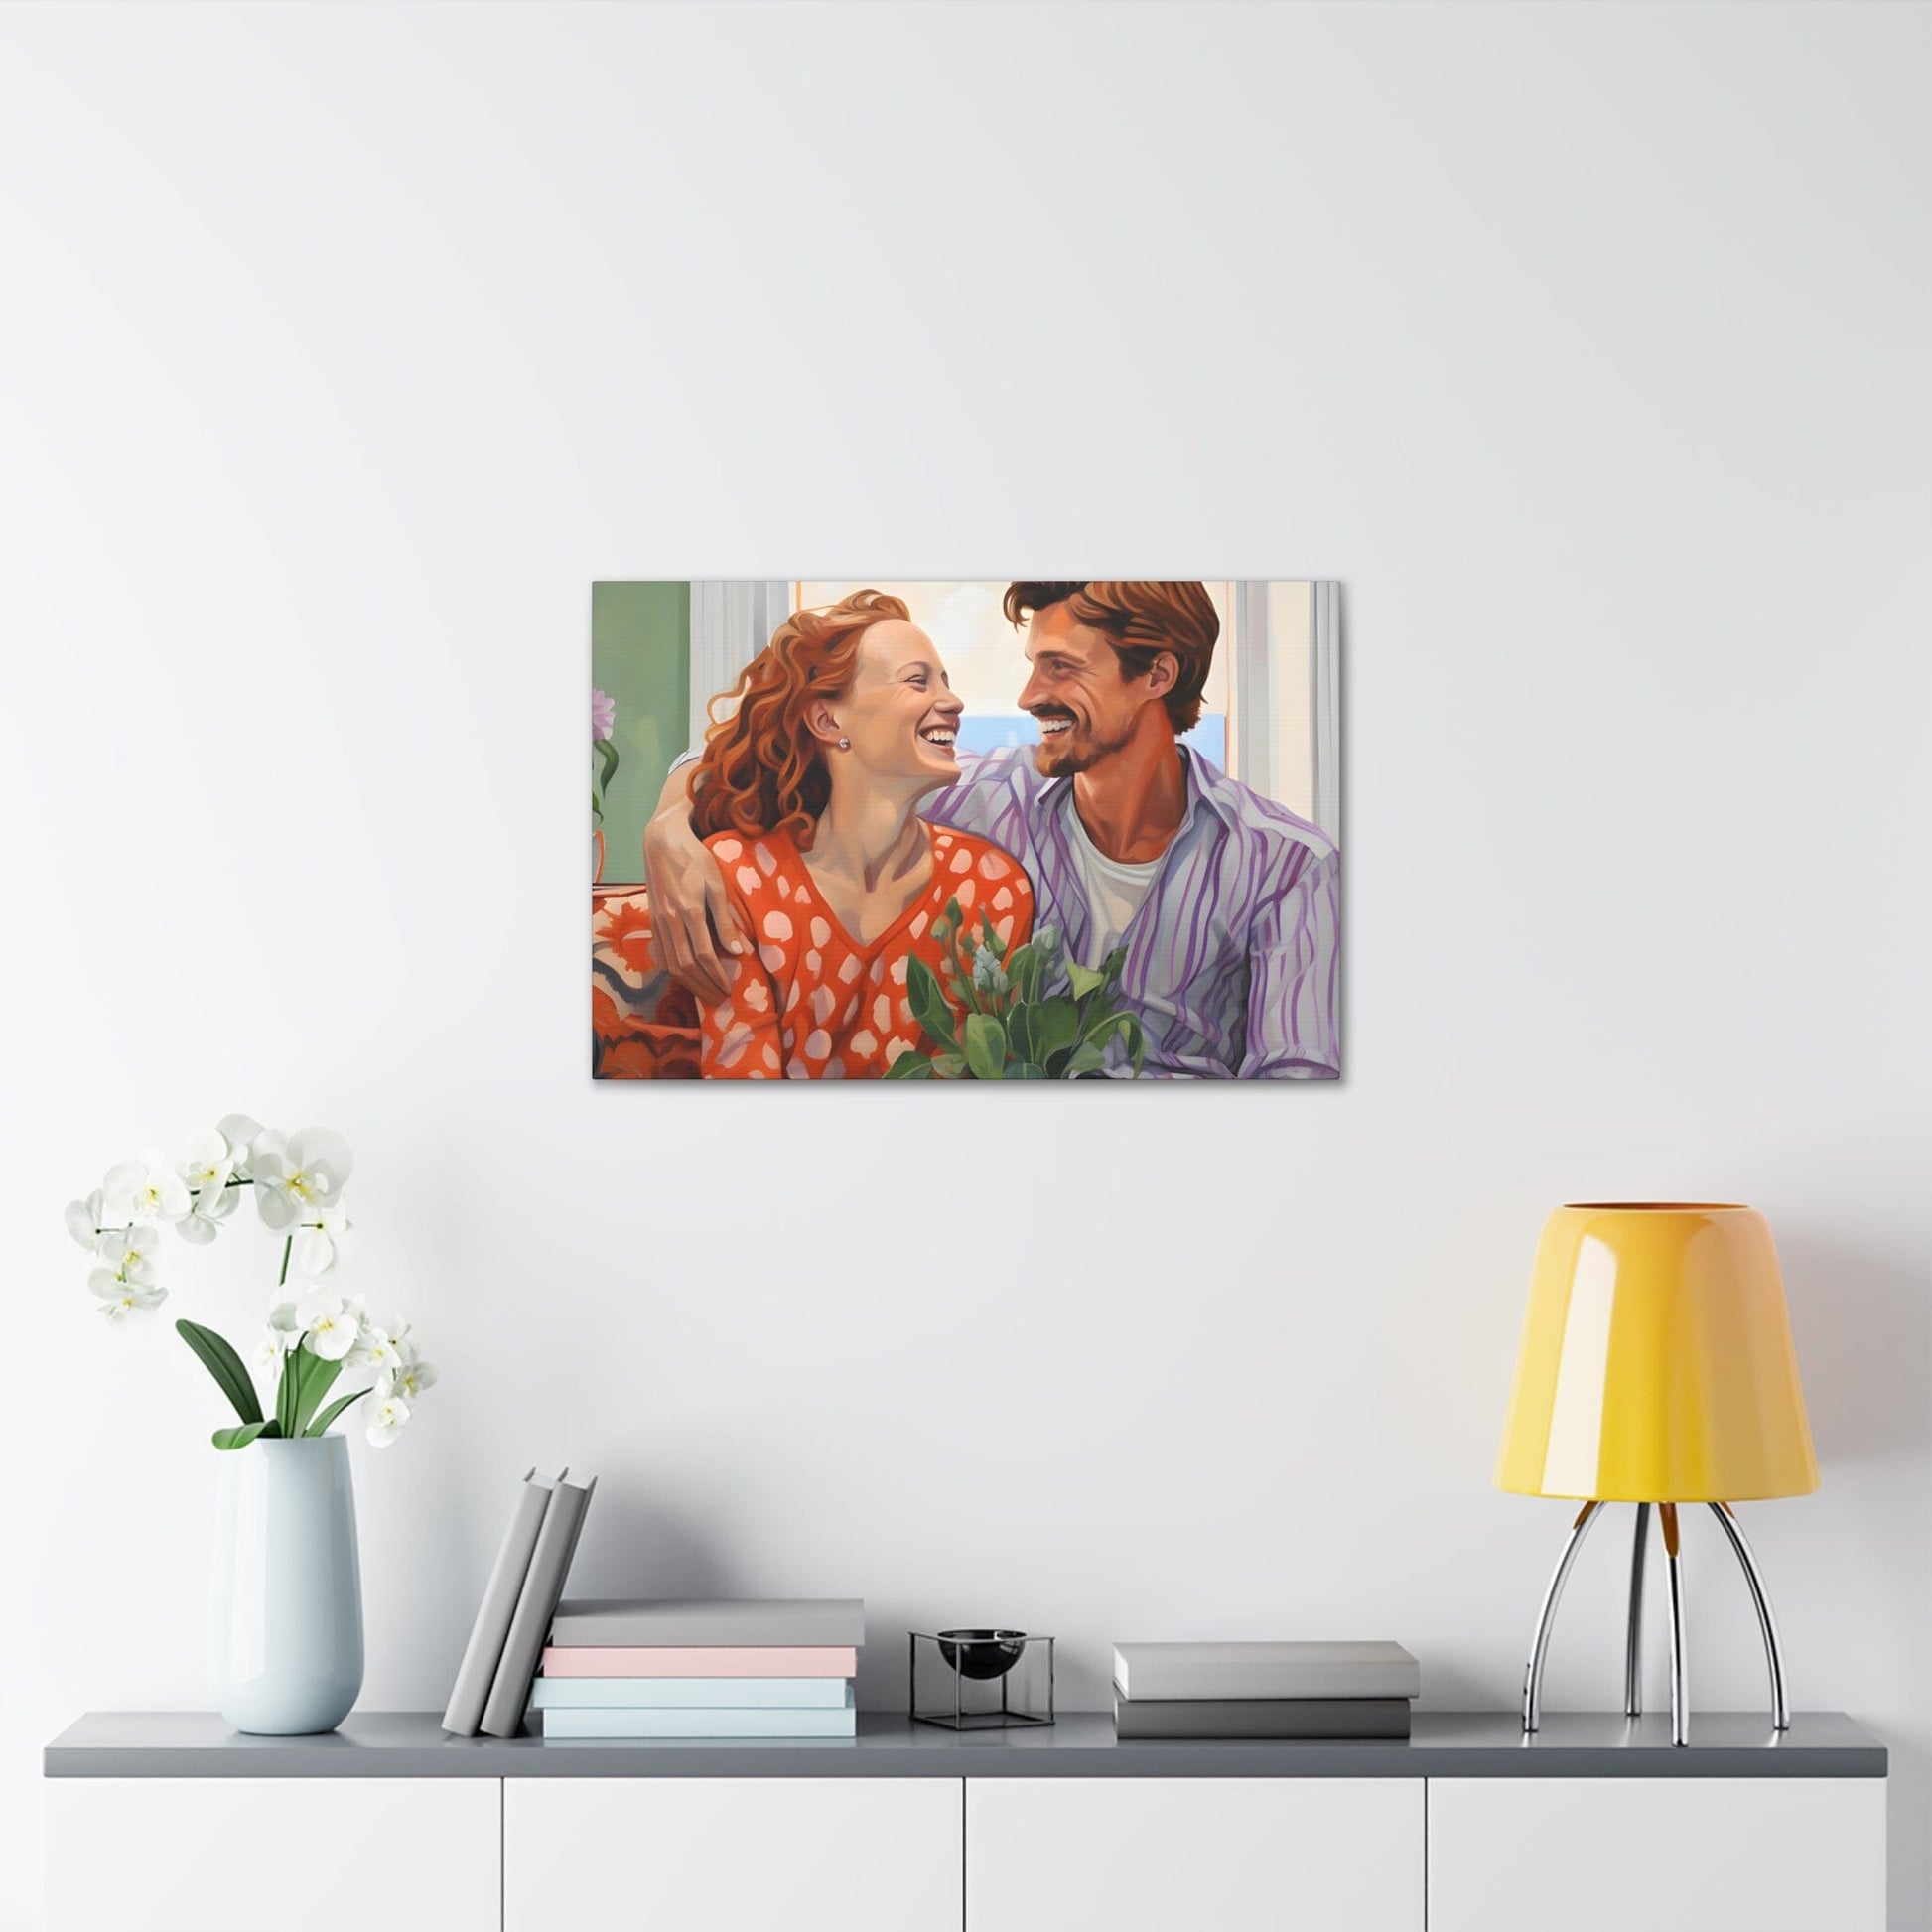 Grace Kim. Blossoming Love: Intimate Moments in the City Graphic Canvas.